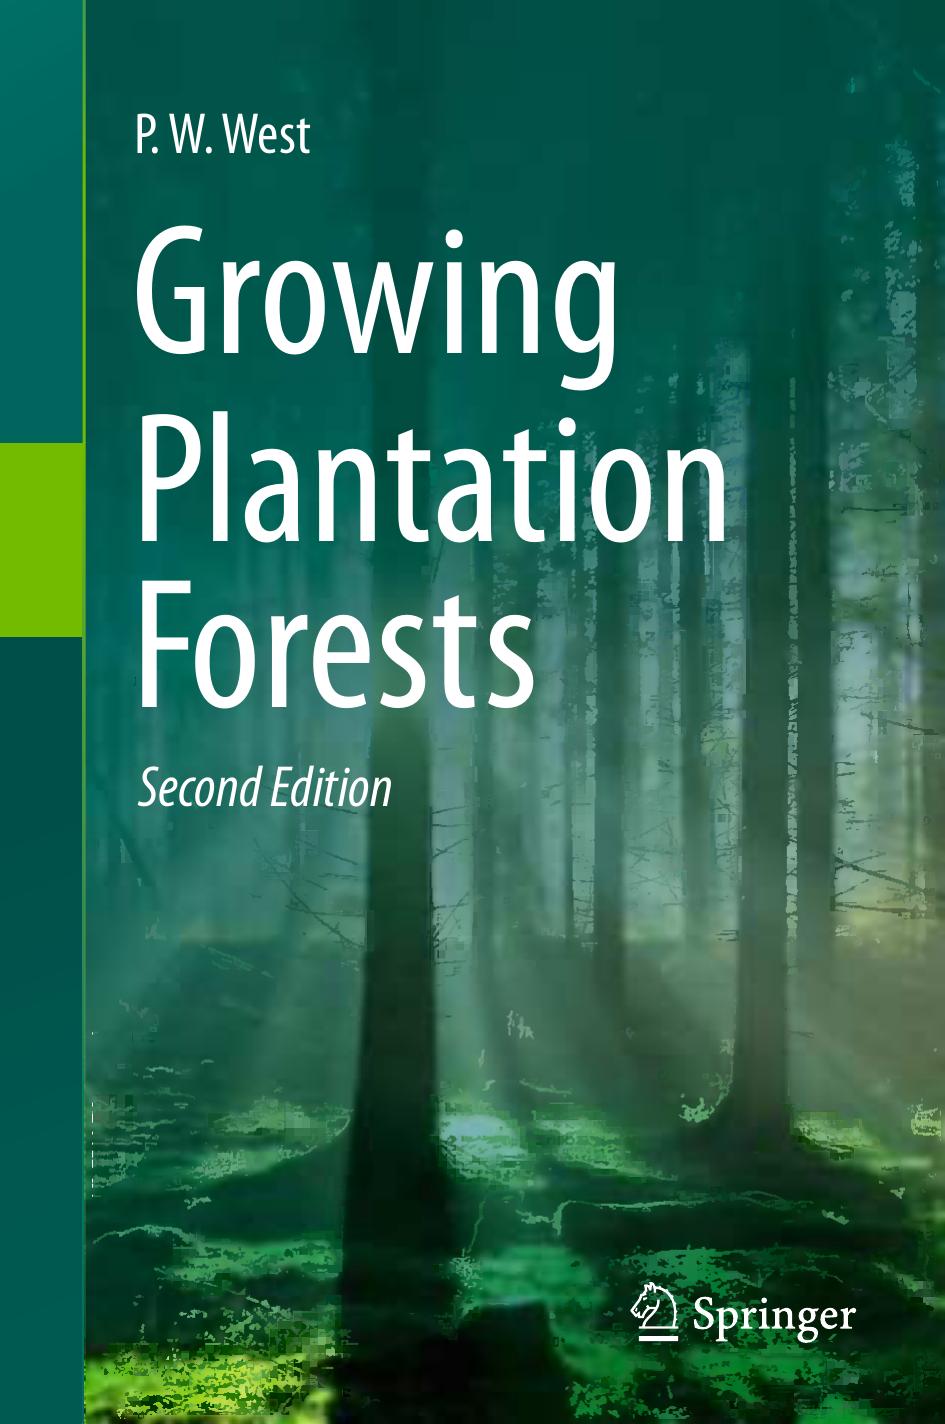 Growing Plantation Forests2014